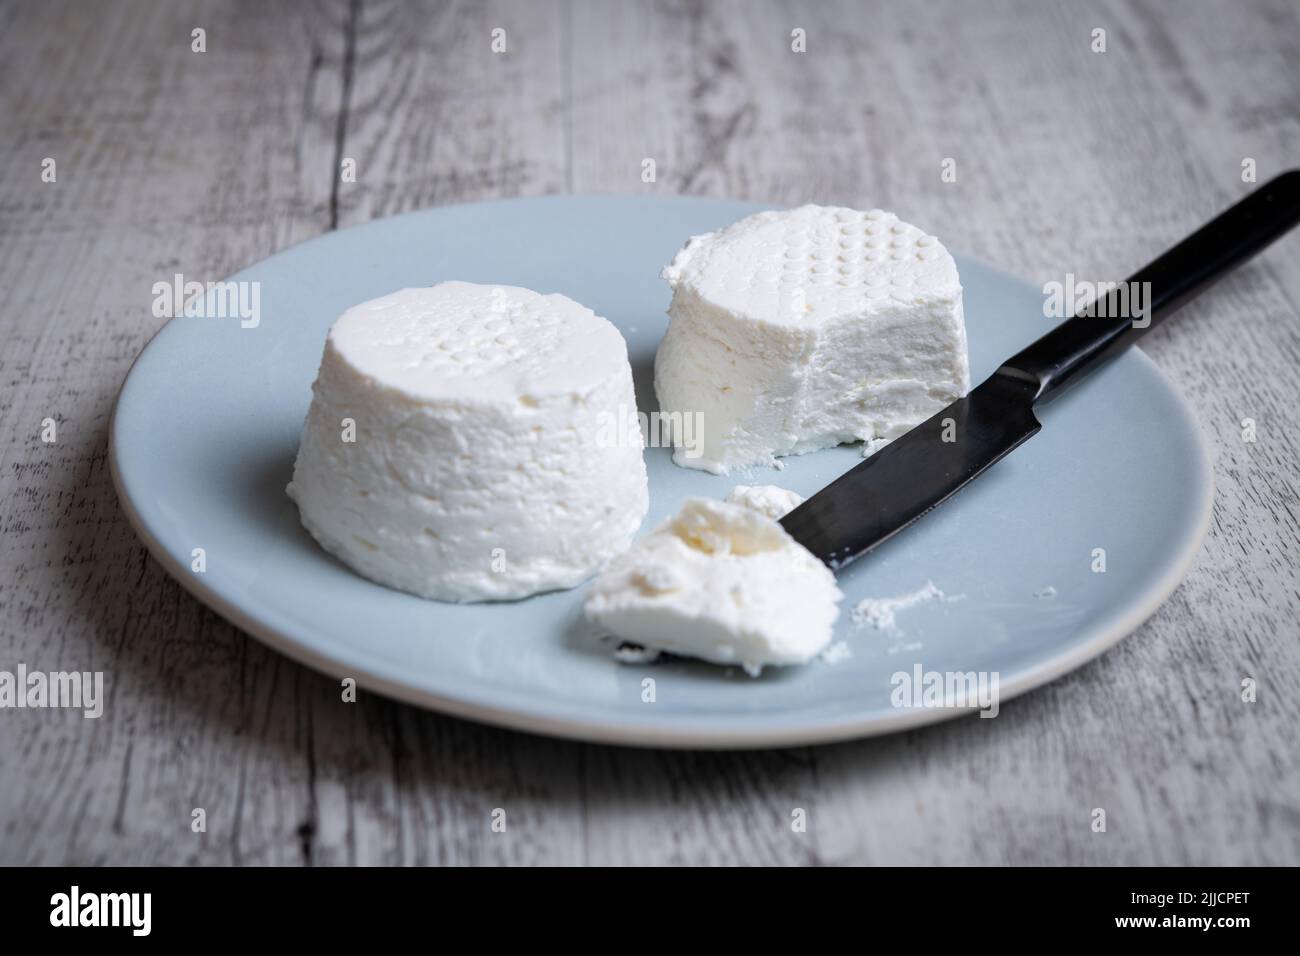 eating a fressh white cheese in a plate on a wooden table Stock Photo